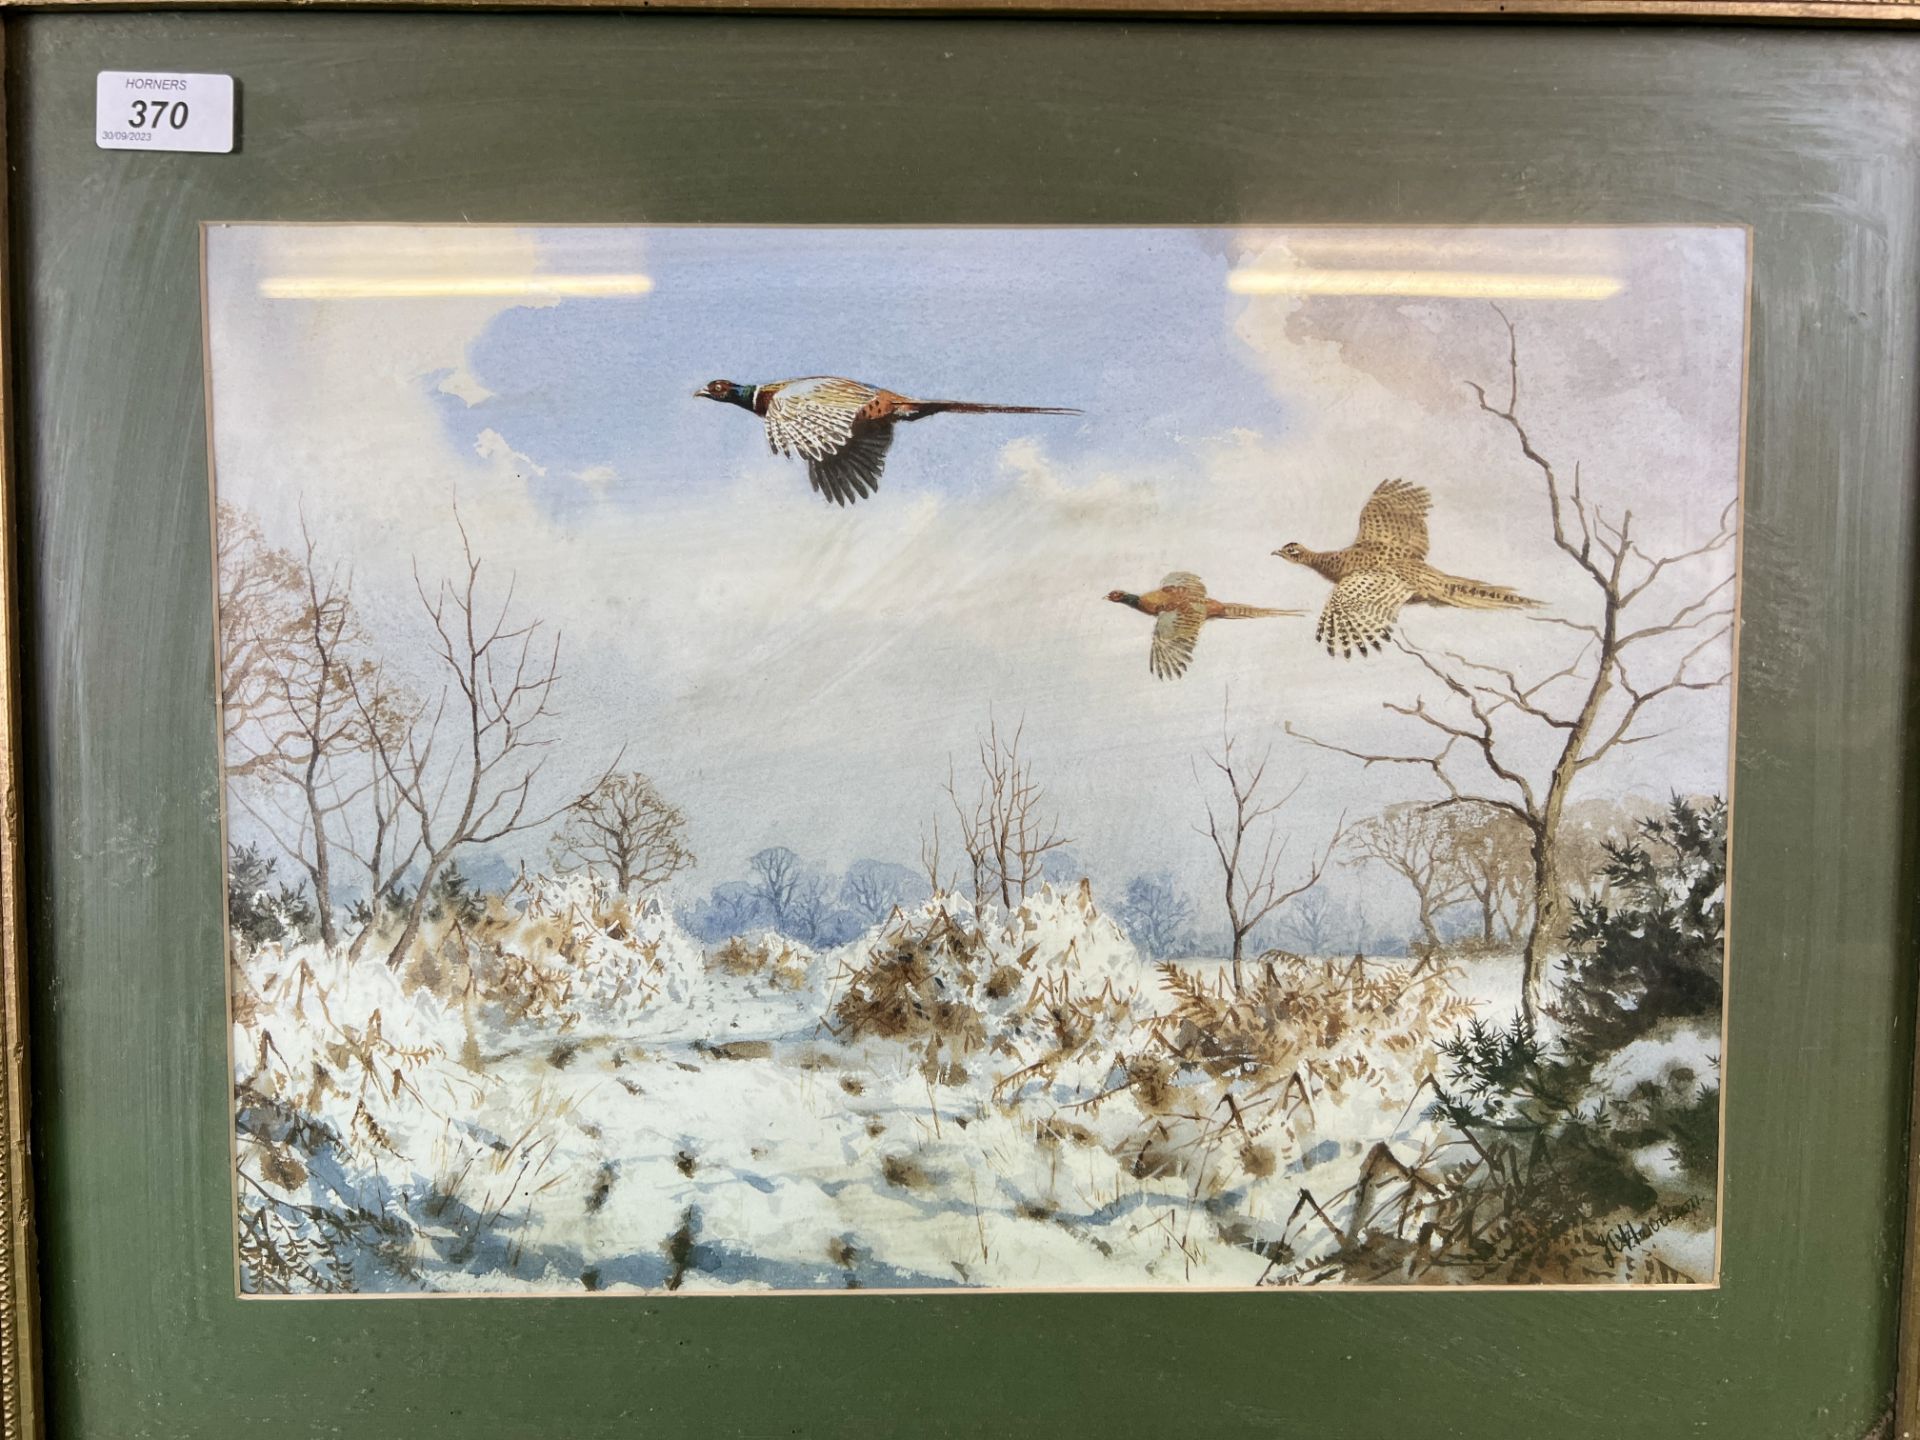 A GILT FRAMED PRINT DEPICTING PHEASANT IN FLIGHT OVER A SNOW COVERED LANDSCAPE BY HARRISON, - Image 2 of 5